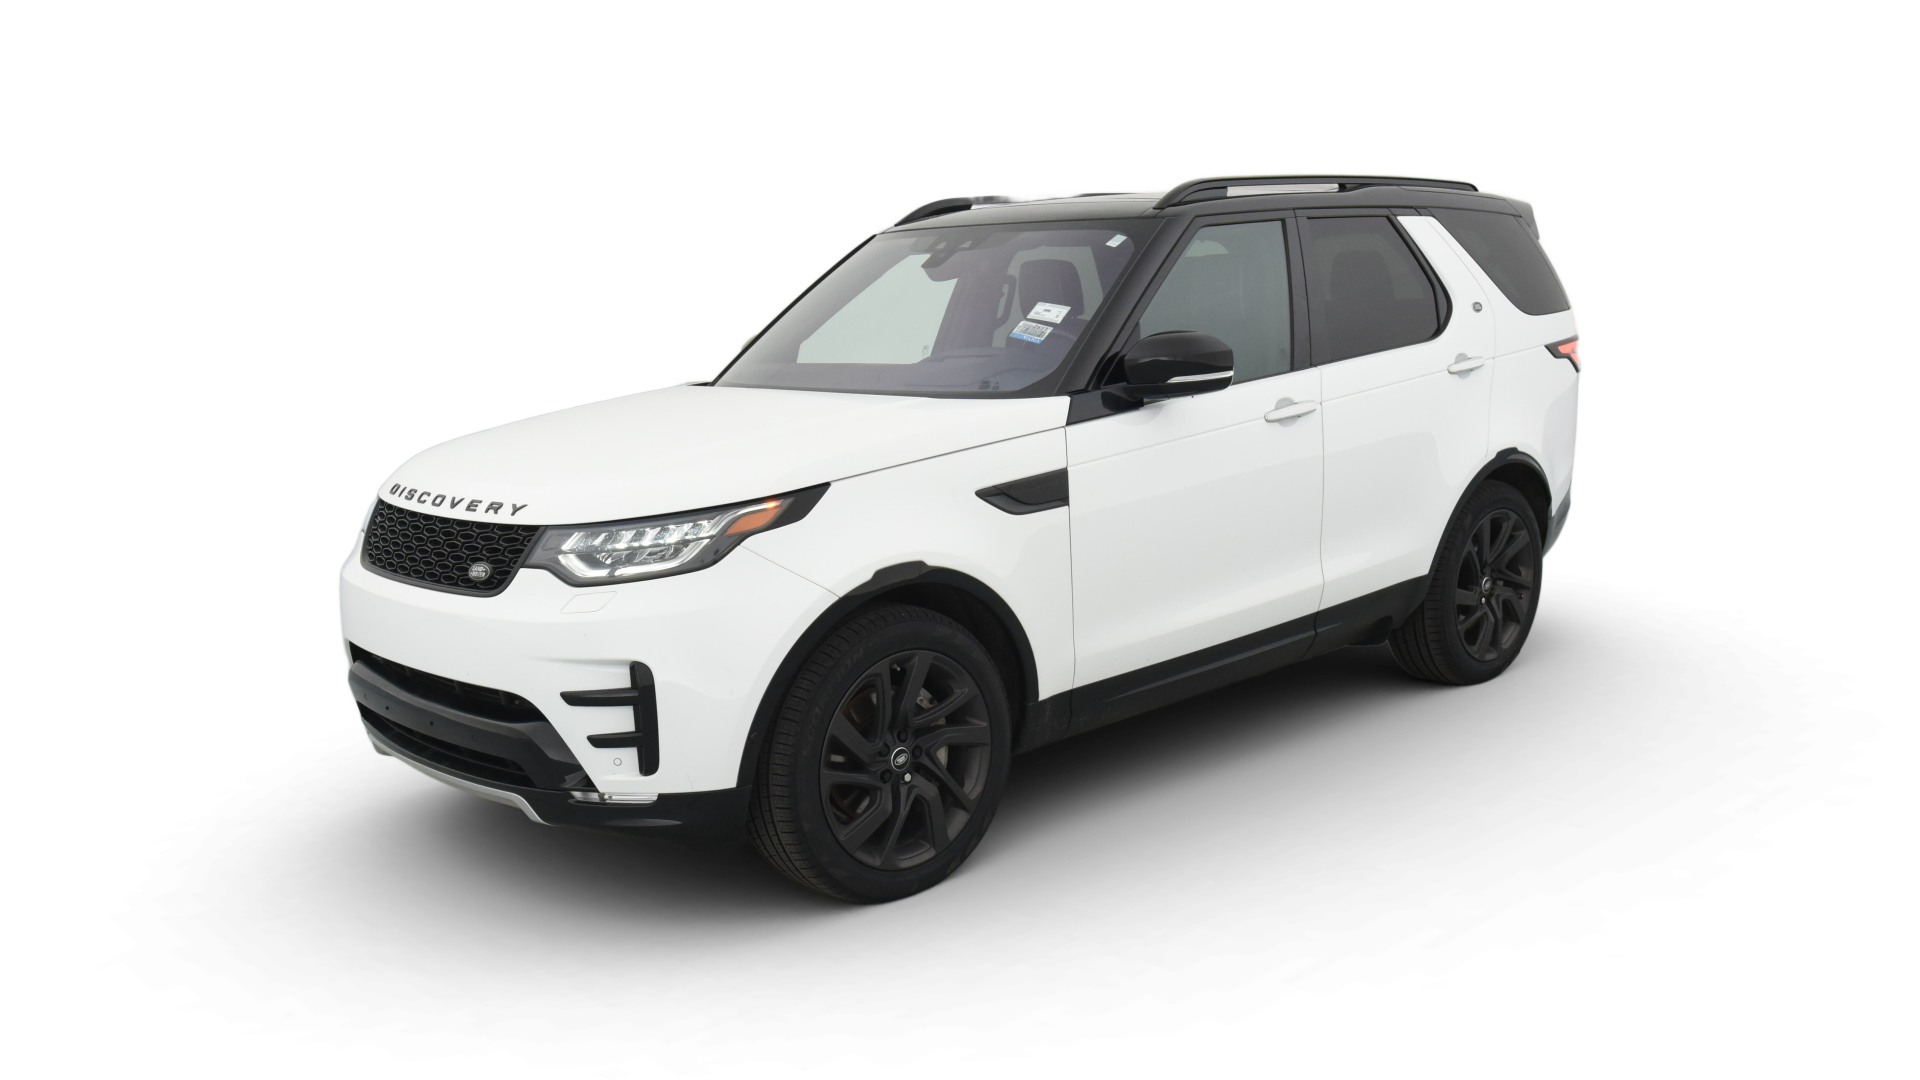 2022 land rover discovery white